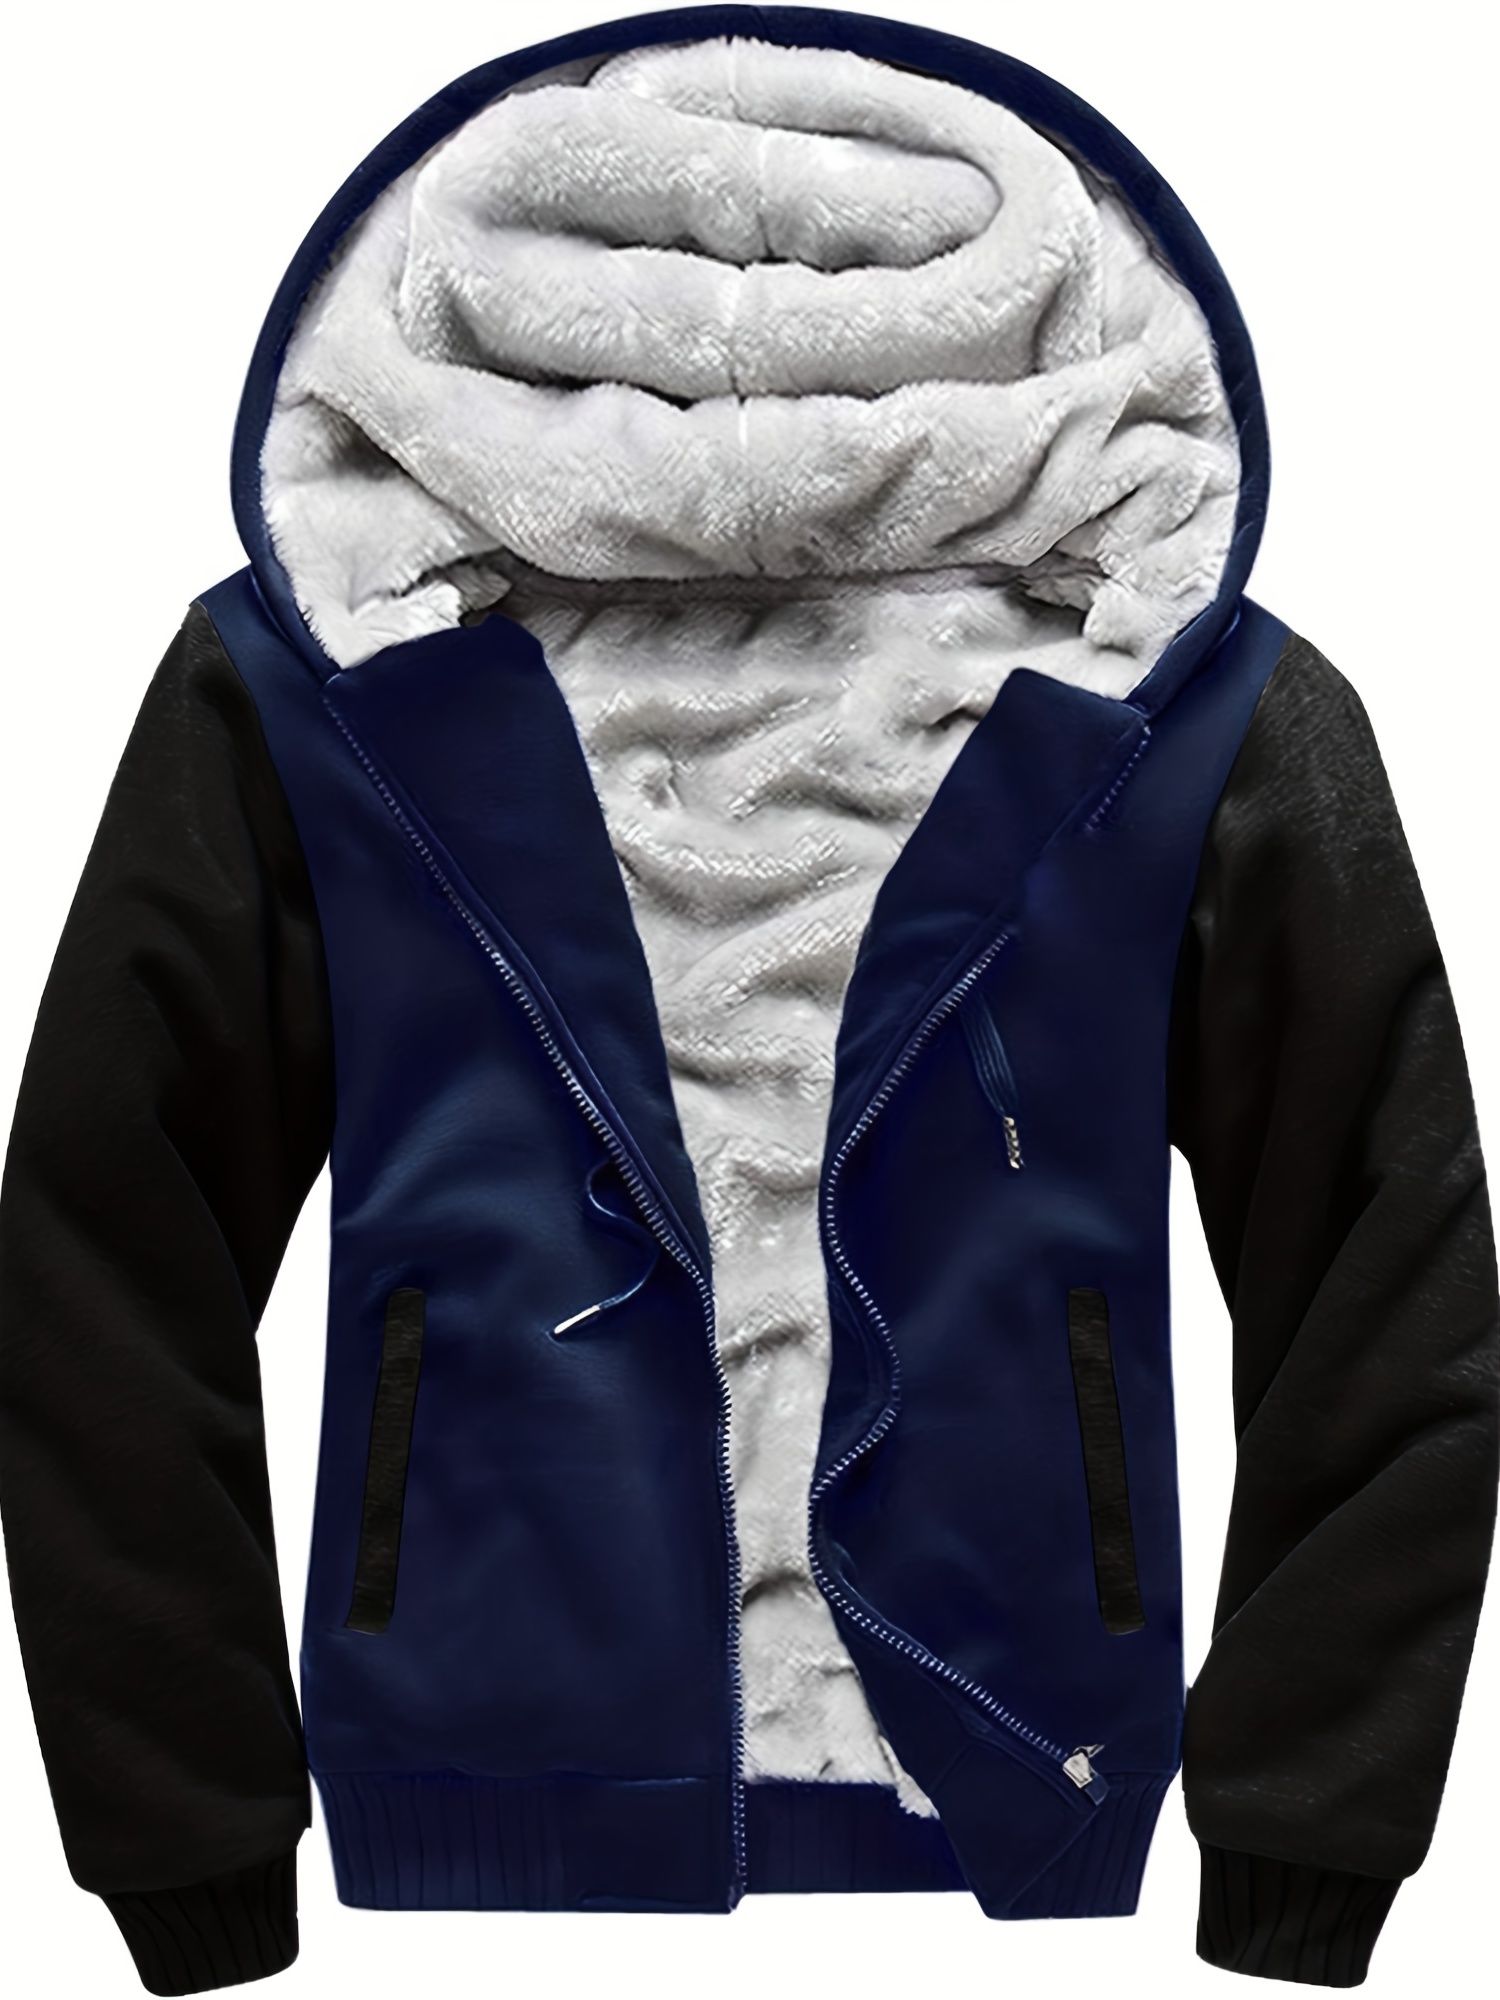 Mens Color Block Sherpa Lined Hoodie Jacket – Ultra-Soft & Warm, Full Zipper, Ideal for Gym & Casual, Winter & Fall Fashion